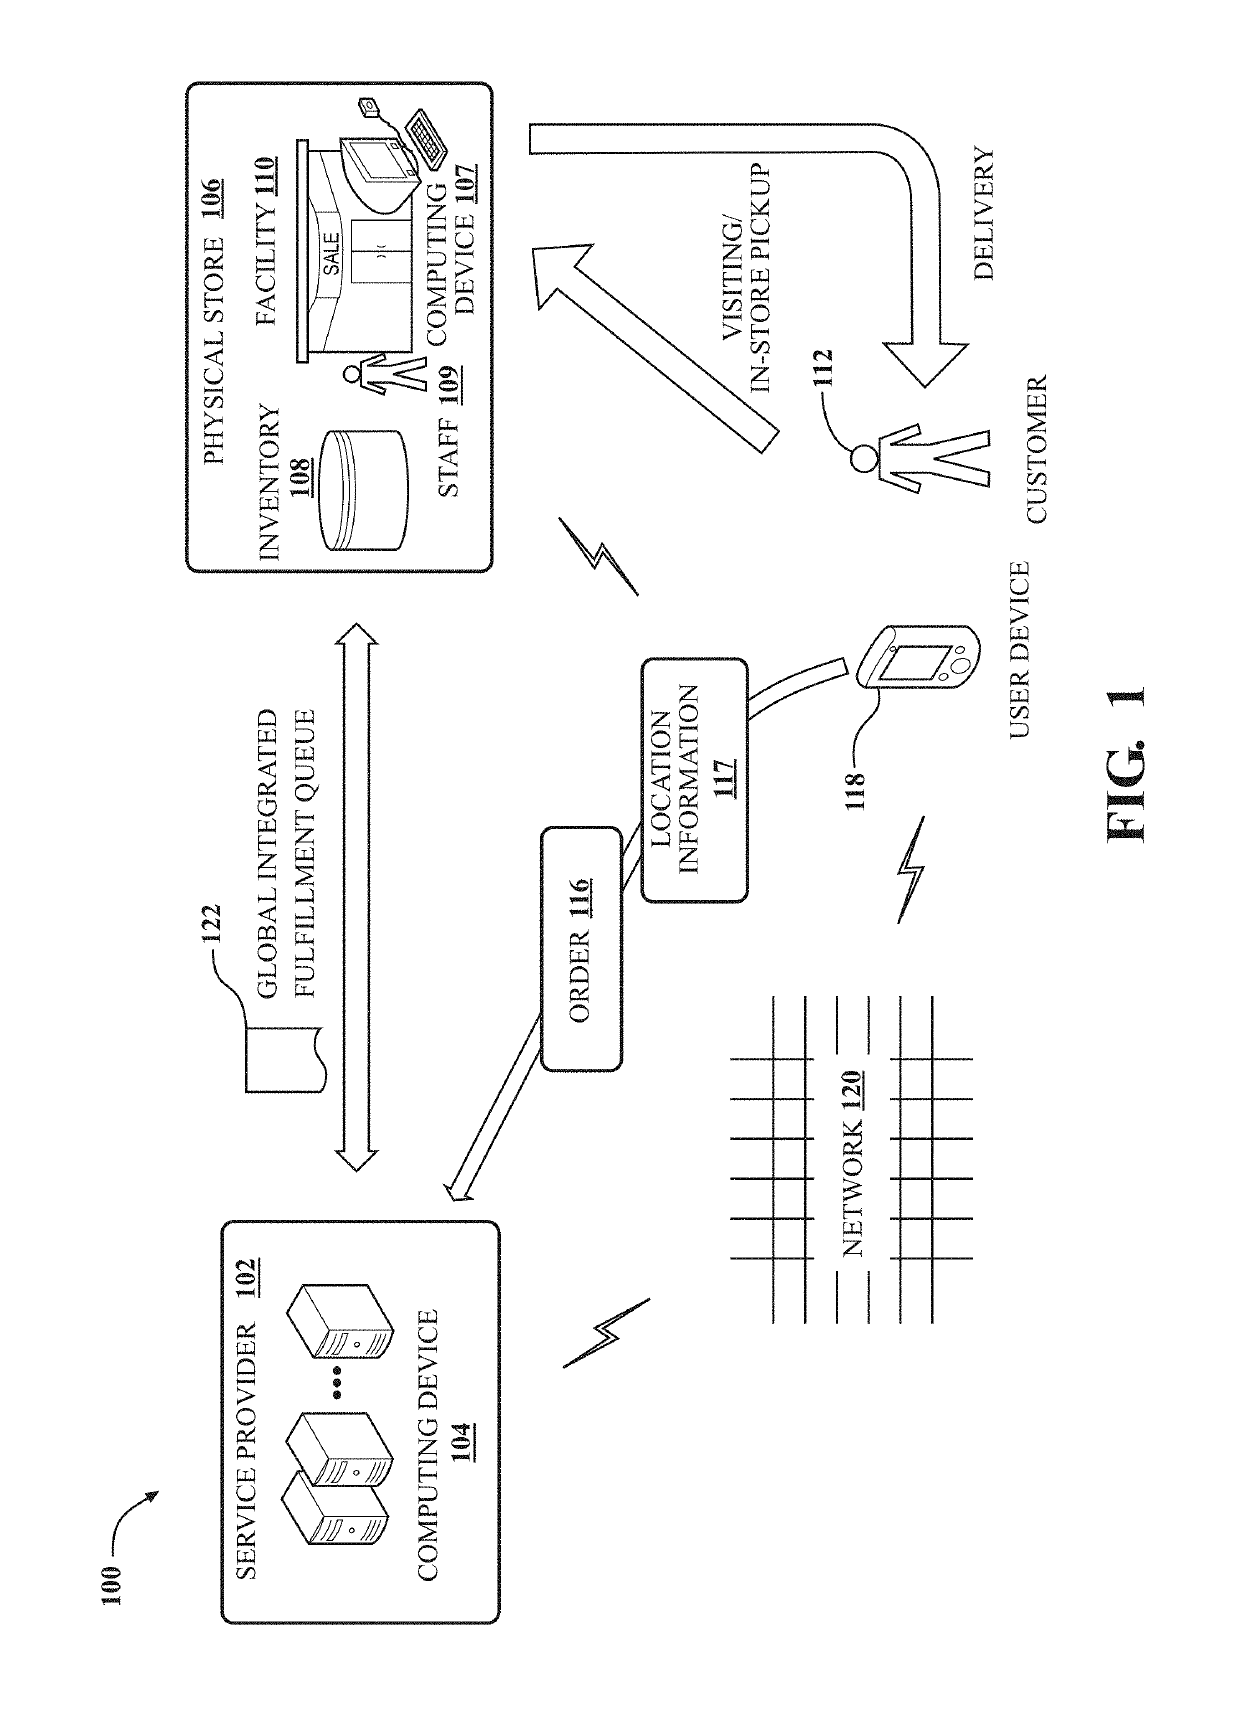 System for improving order batching using location information of items in retail store and method of using same